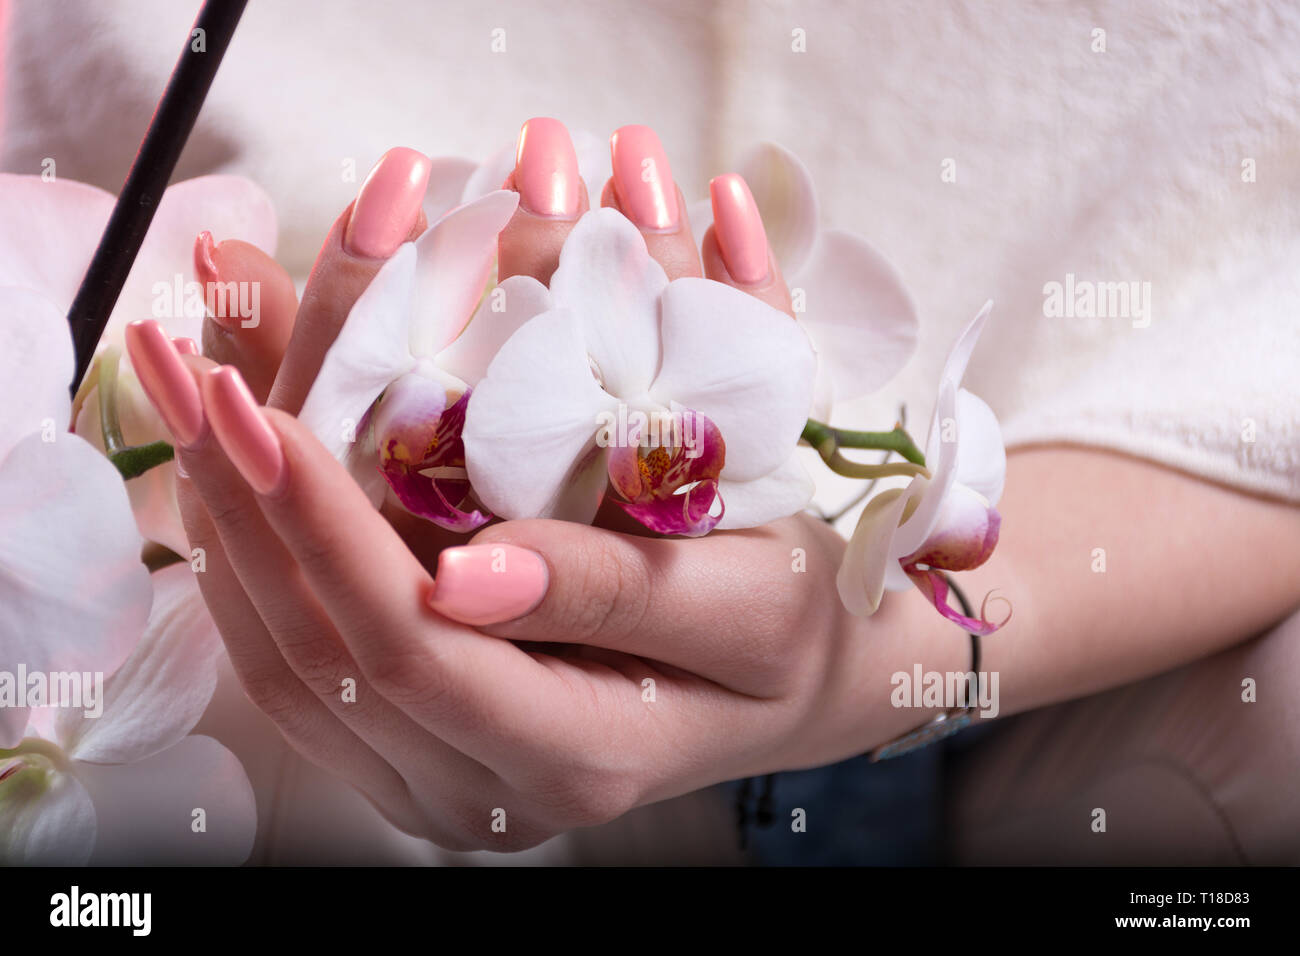 Young girl hands with spring pink nails polish holding white orchid flower in hands. Beauty and manicure concept. Close up, selective focus Stock Photo